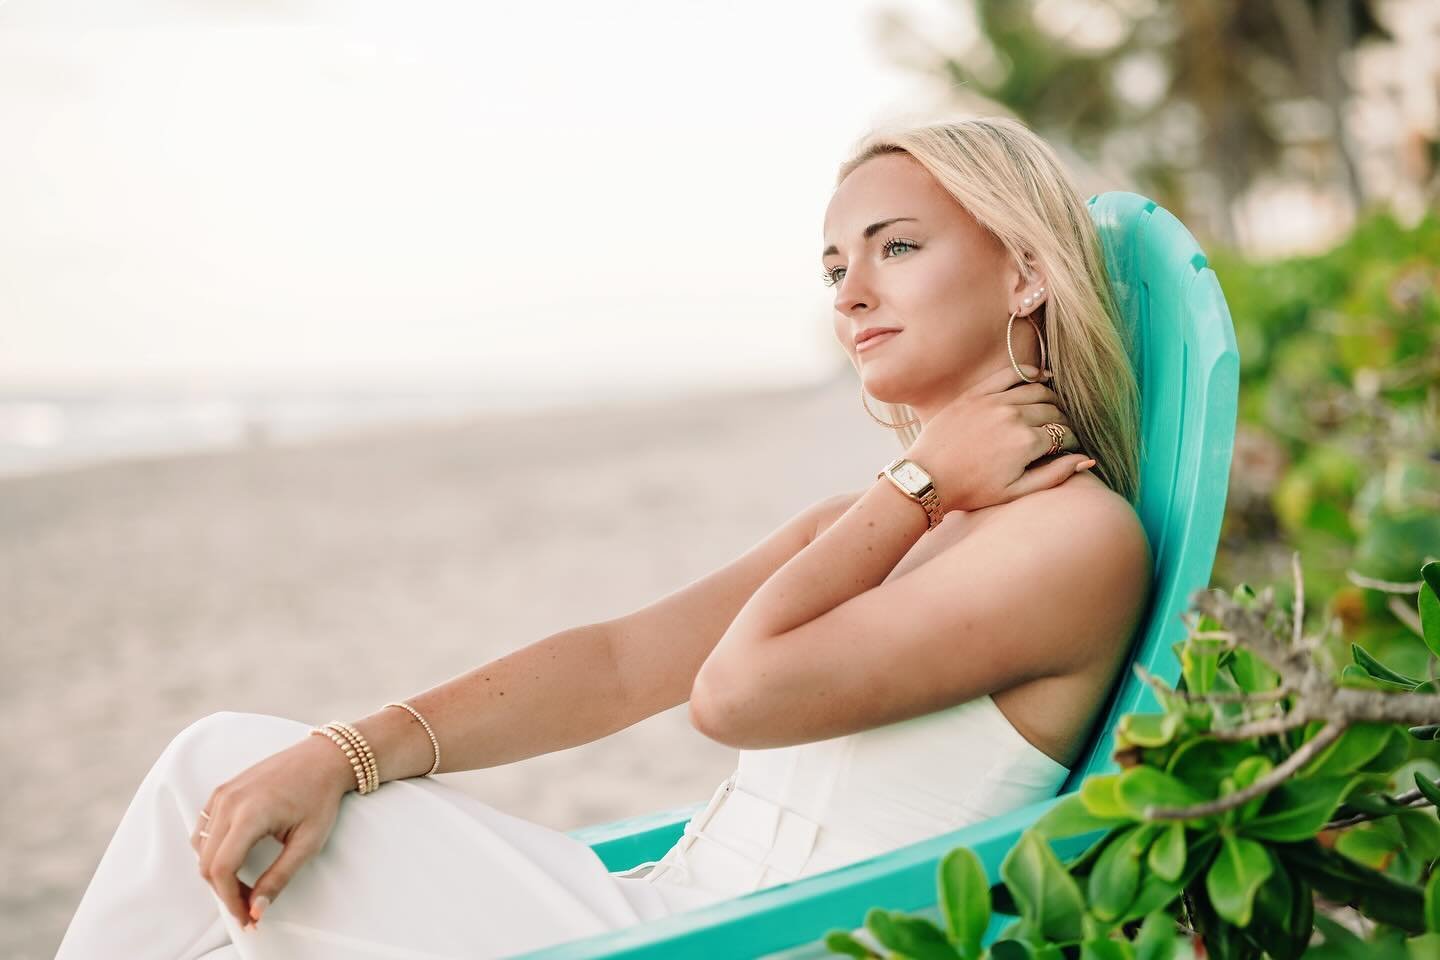 Starting the week with these stunning sneak peeks from last week&rsquo;s beach senior session. ✨📸
Spring is the best time for senior sessions in South Florida before it gets too hot! Here are some of my favorites&hellip; 😍🌊
#classof2024 
.
.
.
.
.